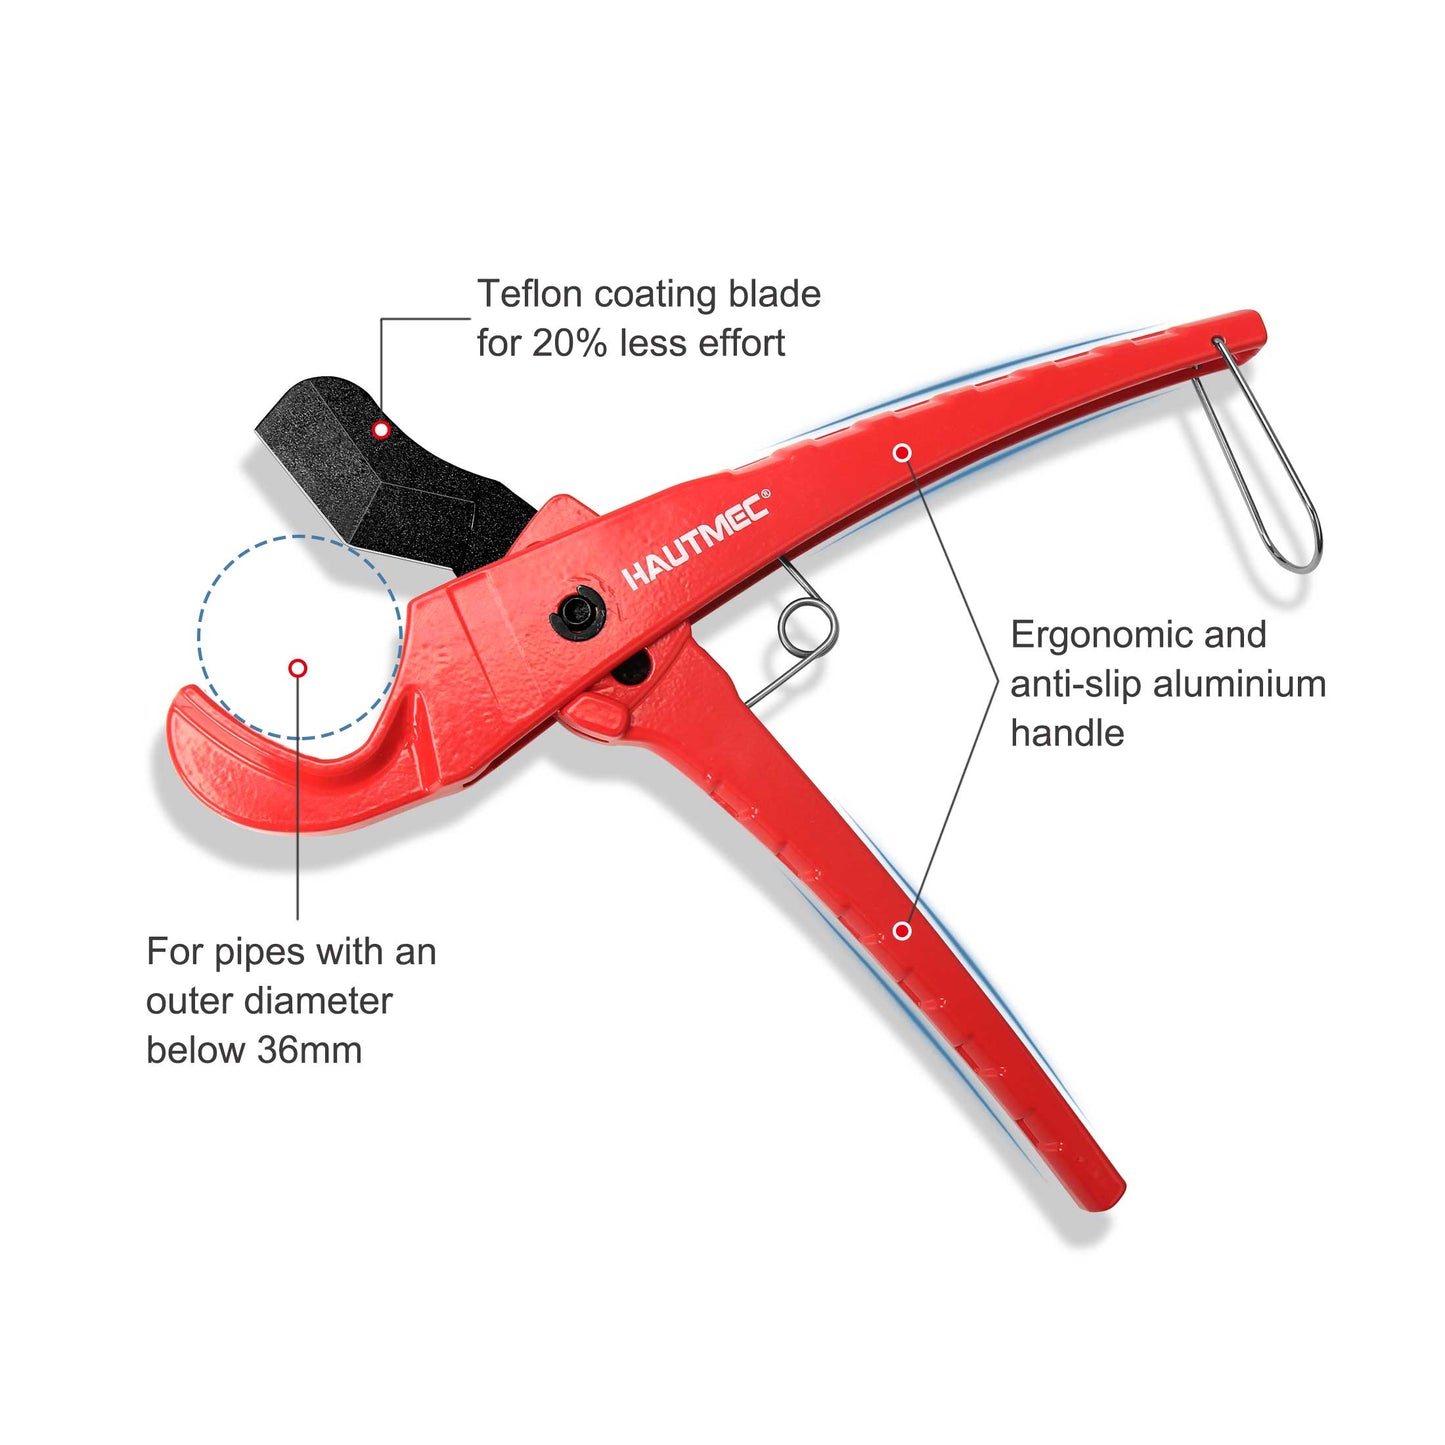 HAUTMEC PEX Pipe and Tubing Cutter for Cutting 36mm PVC, CPVC, PPR, PEX, Rubber Hose and Plumbing Pipes, Ideal for Home Work, Handymen and Plumbers HT0256-TC